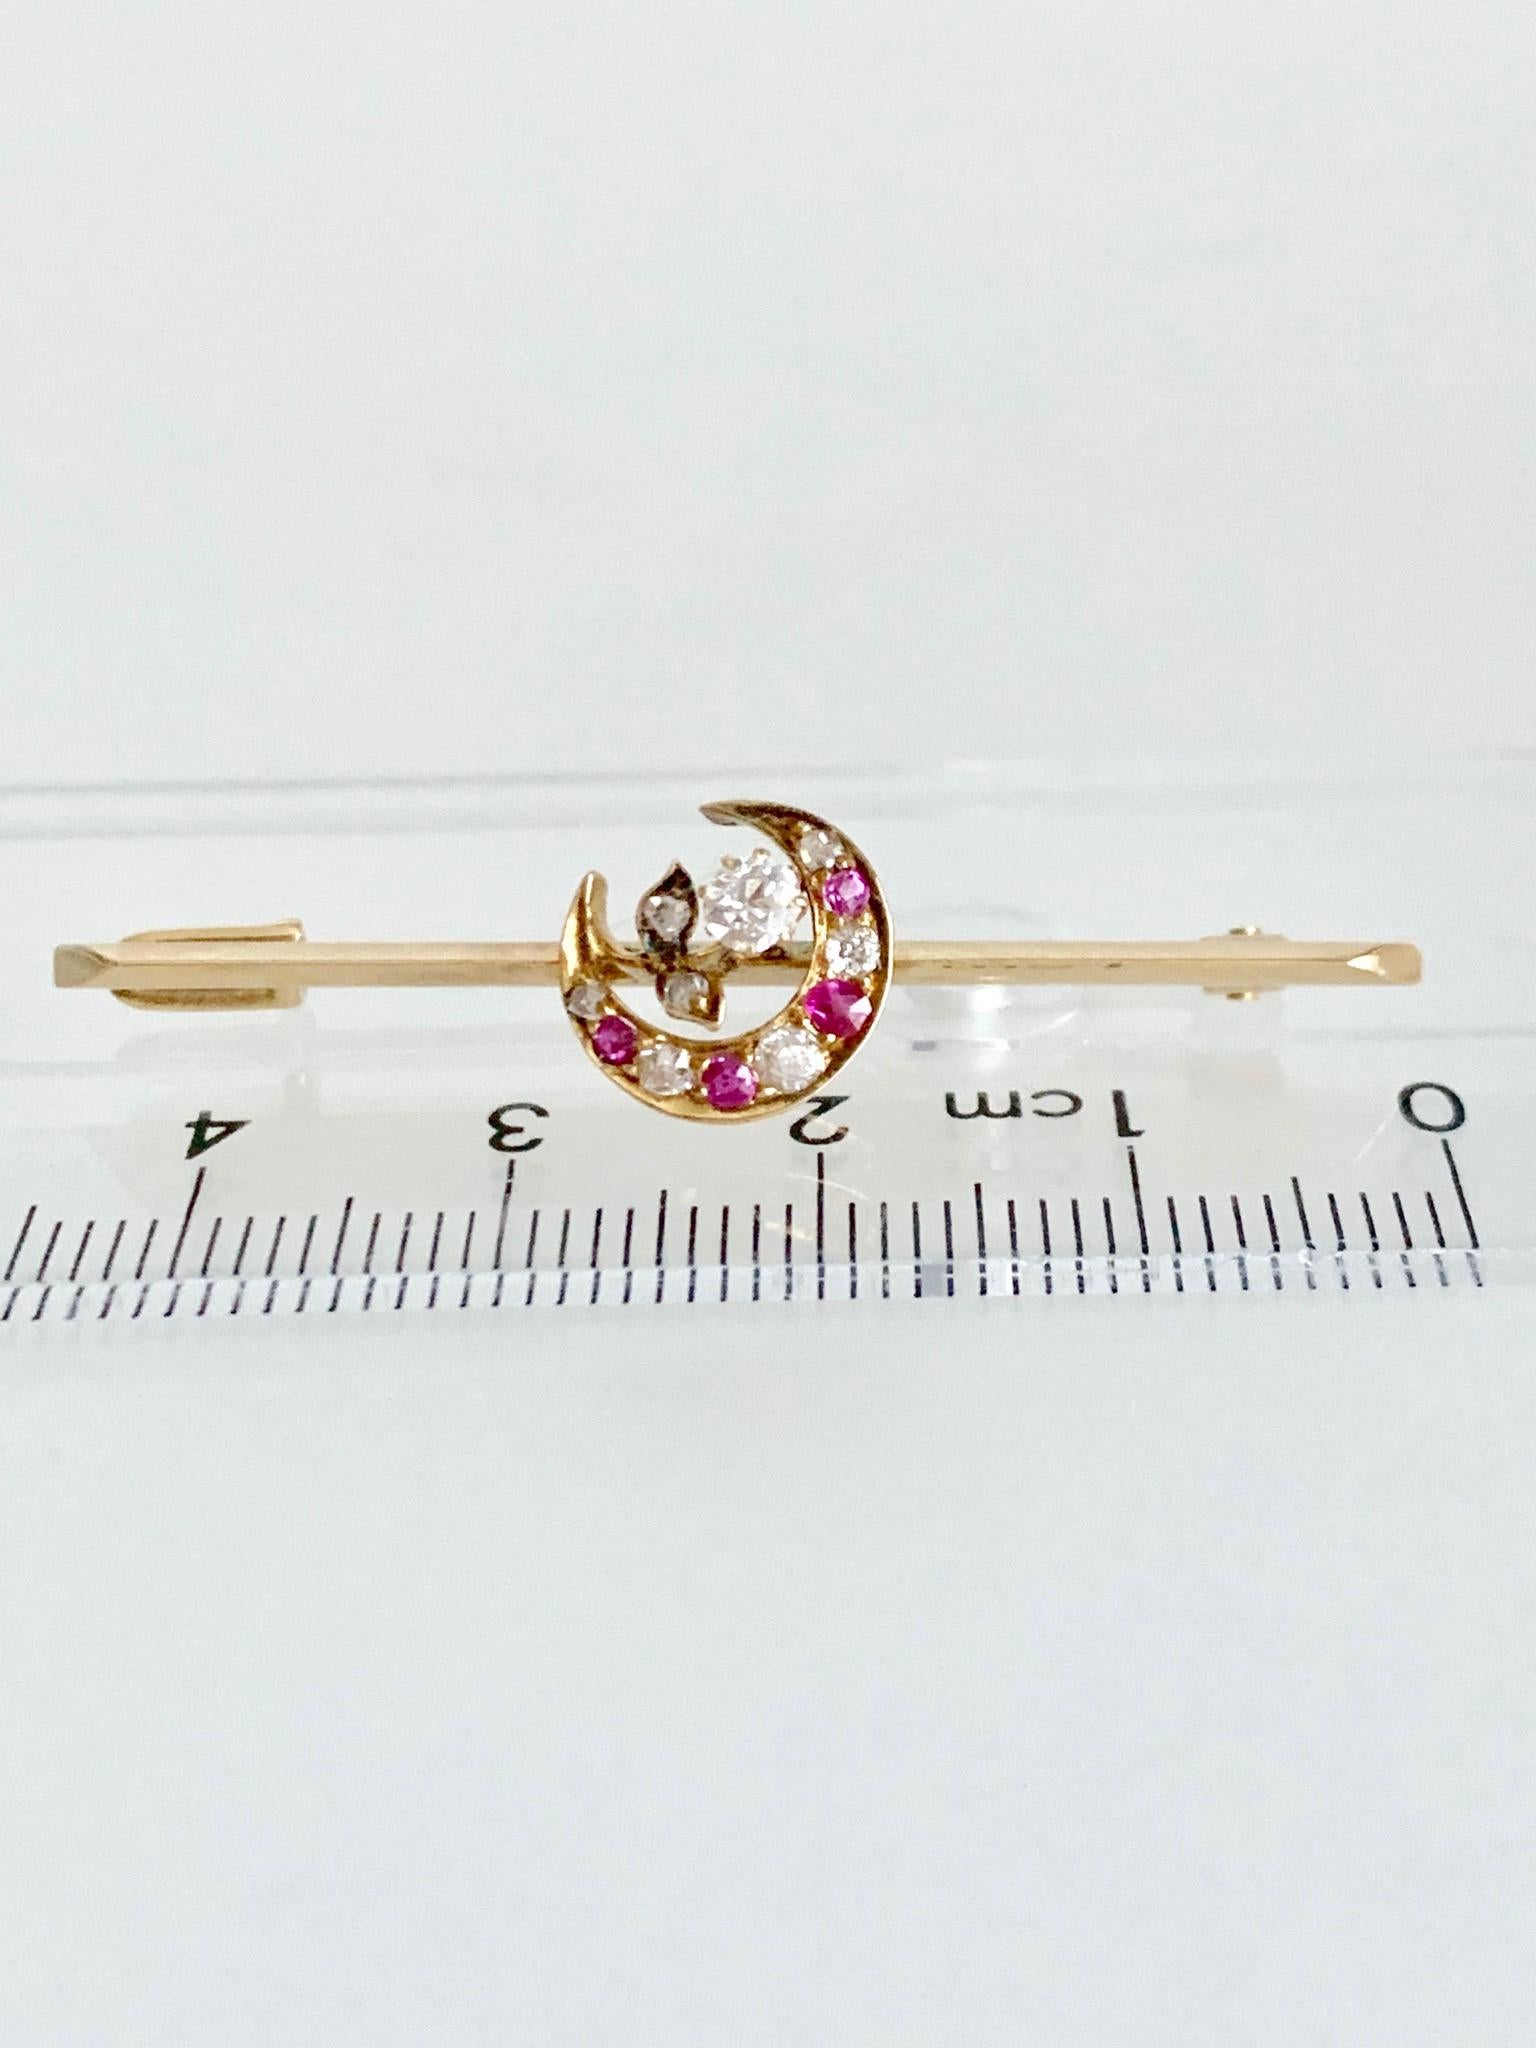 Round Cut Gemolithos Ruby and Diamond Brooch 19th Century 18 Karat Gold for Every Day